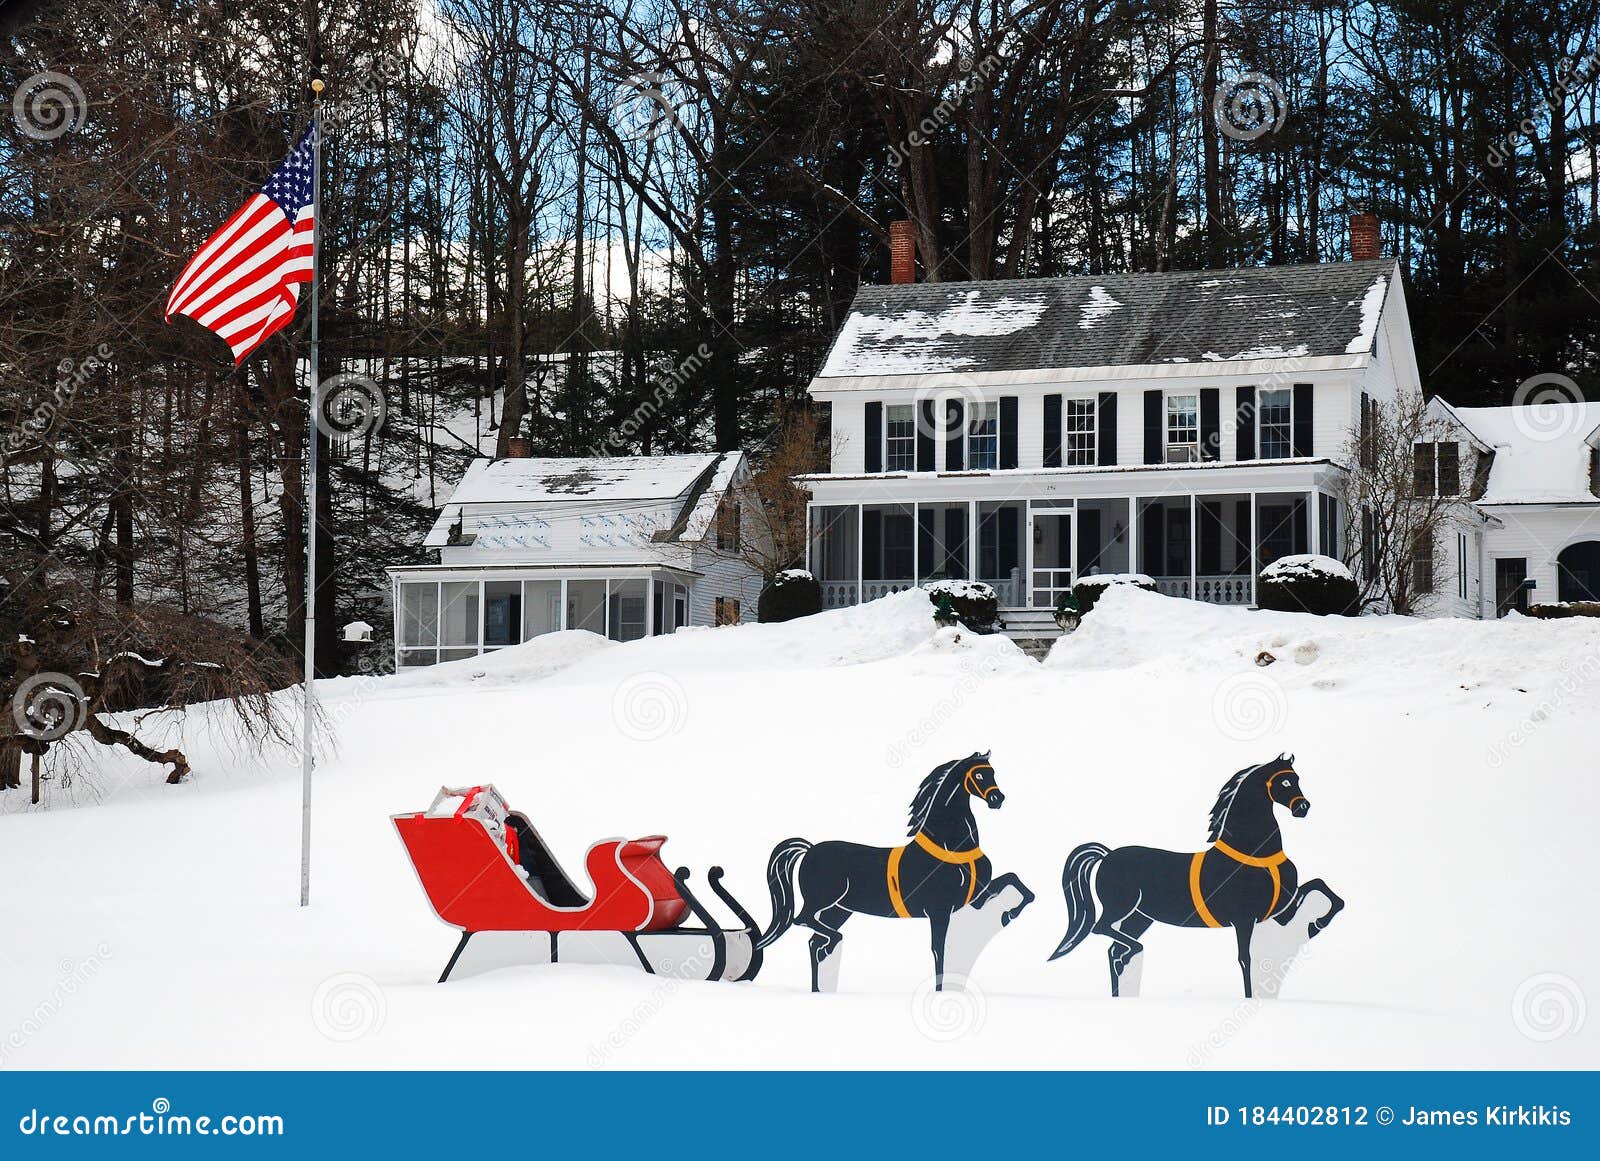 Christmas Decorations in Northern New England Editorial Photography